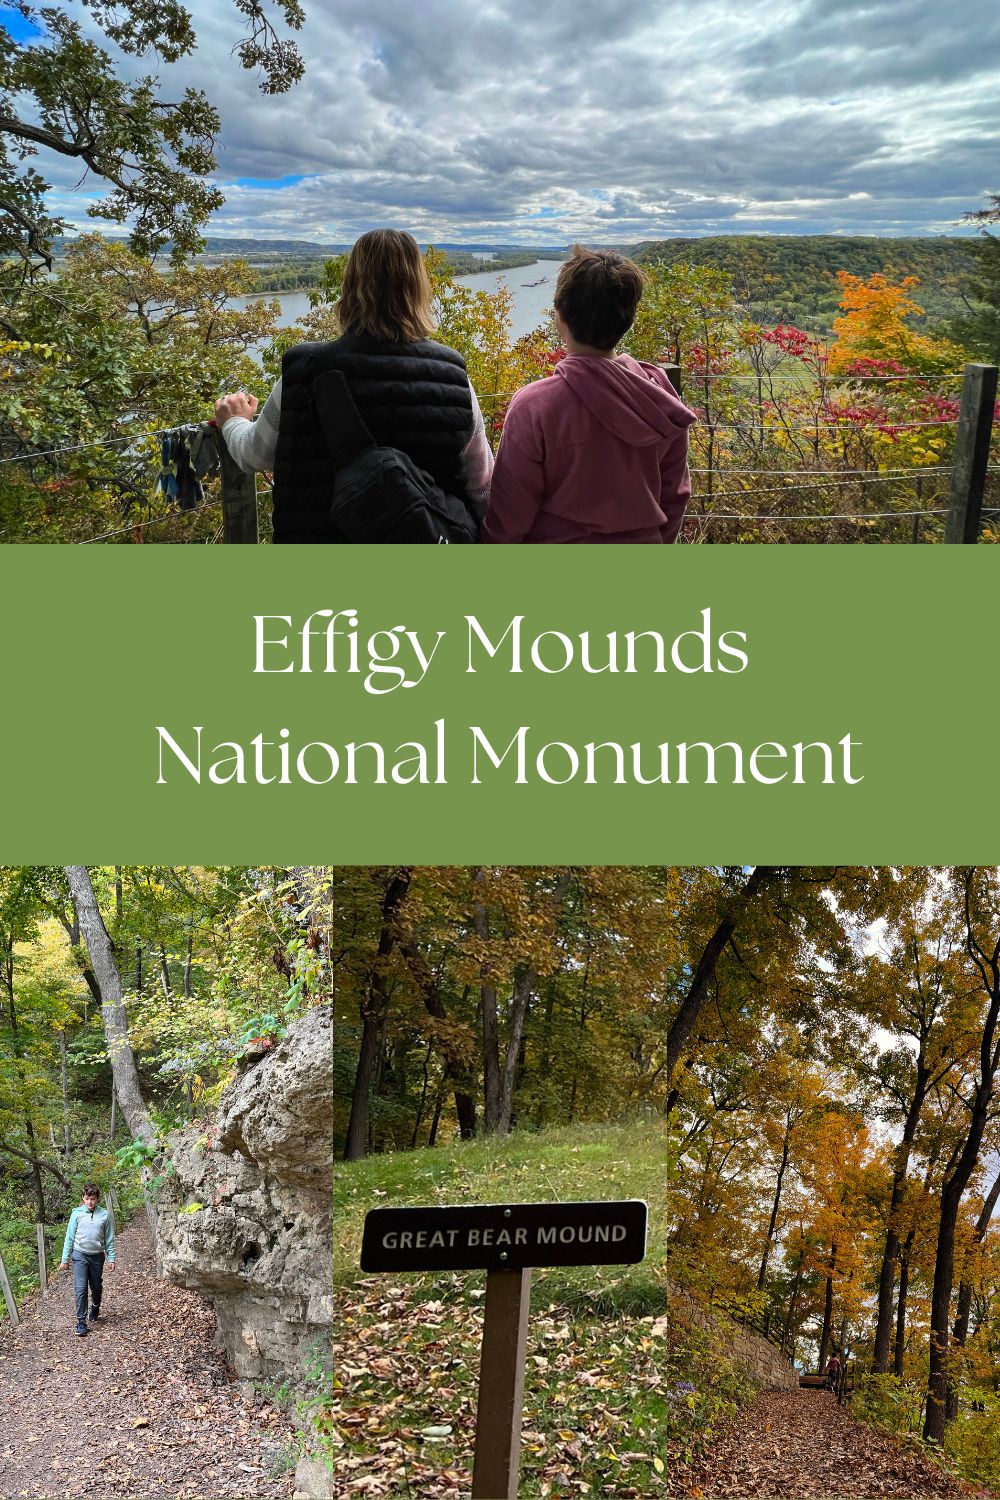 Exploring Effigy Mounds National Monument in northeast Iowa